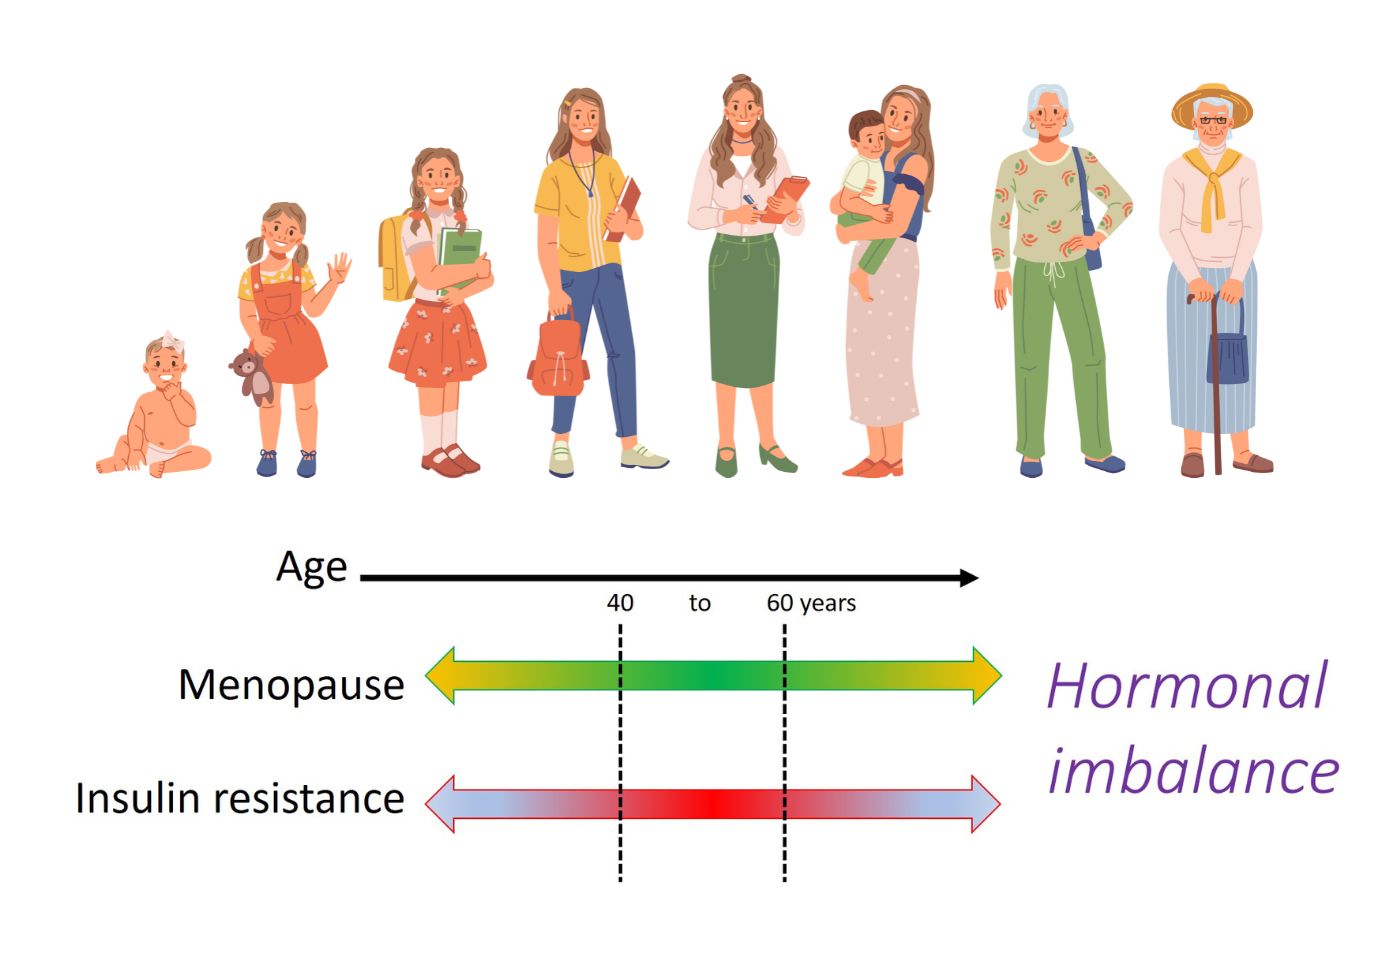 Menopause and insulin resistance